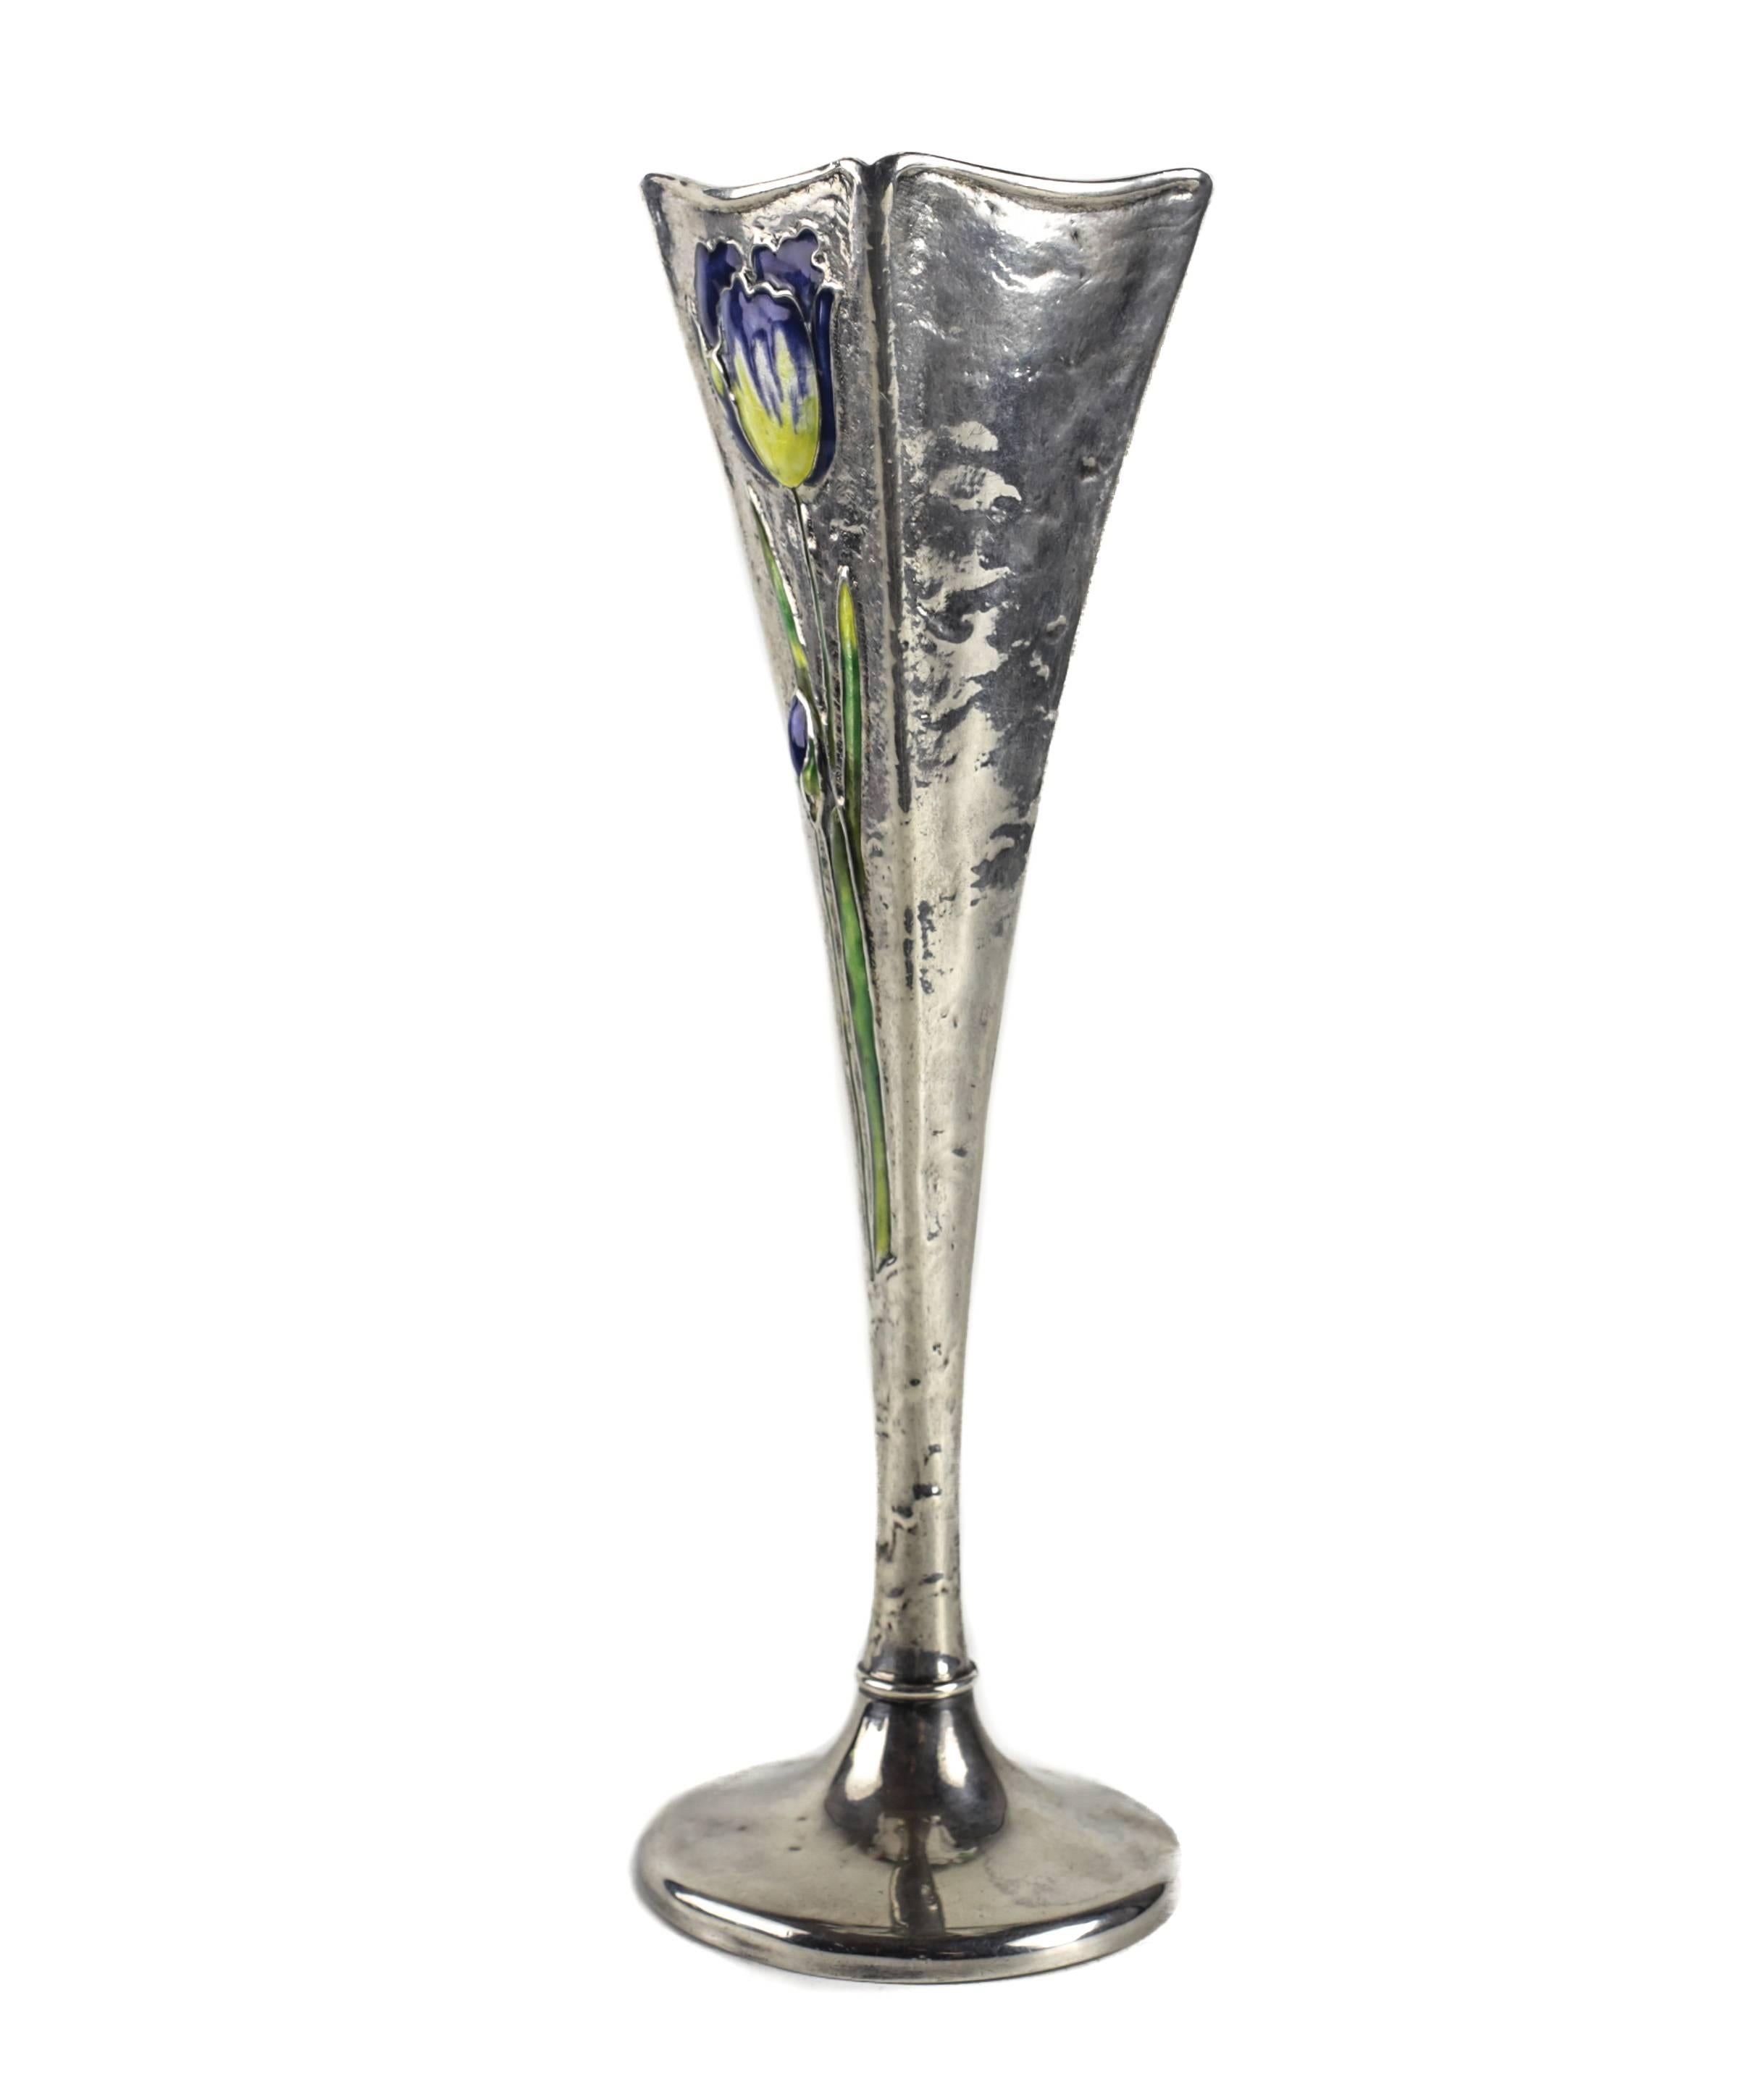 American Sterling Silver Bud Vase with Enameled Tulips by Gorham Mfg. Co, 1897 For Sale